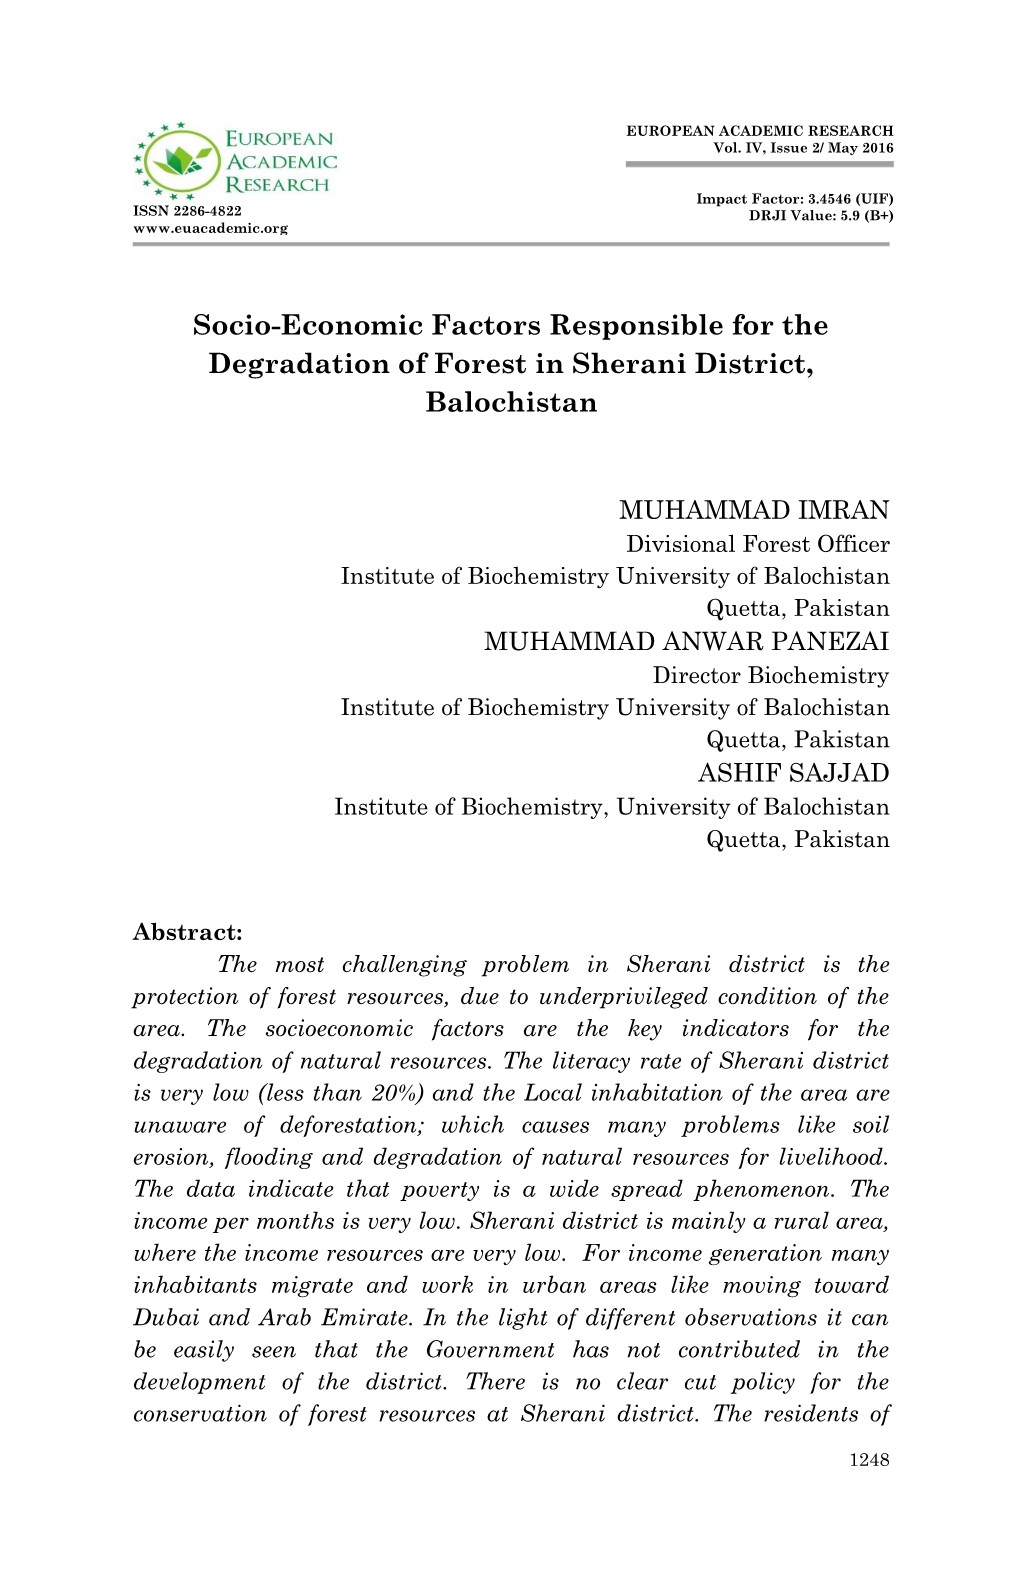 Socio-Economic Factors Responsible for the Degradation of Forest in Sherani District, Balochistan